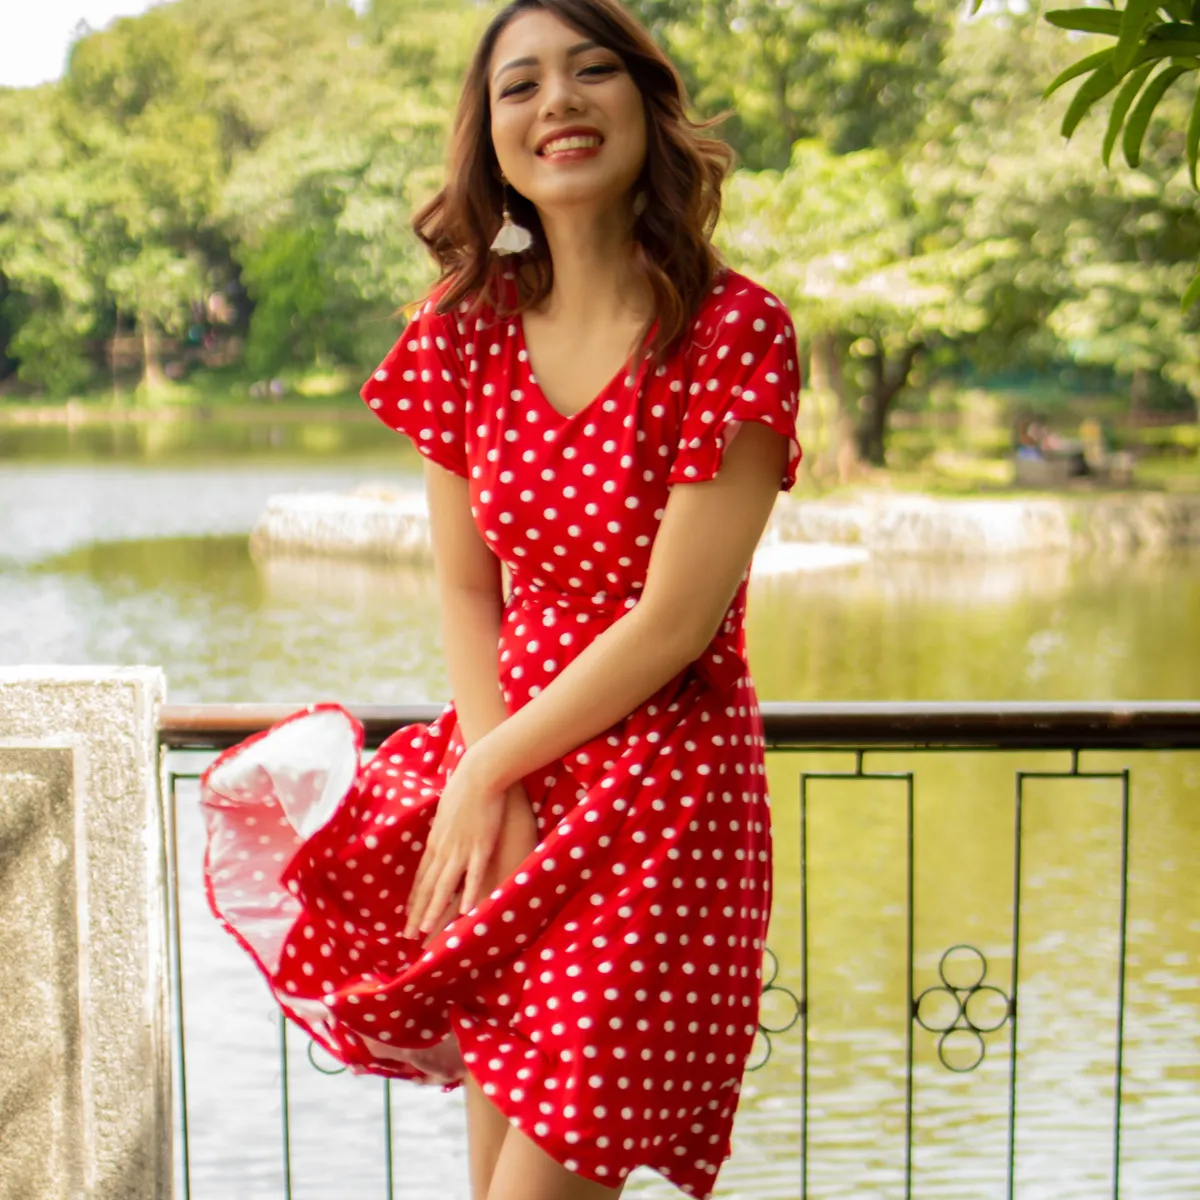 Woman dressed in classic French wardrobe: red polka dot dress